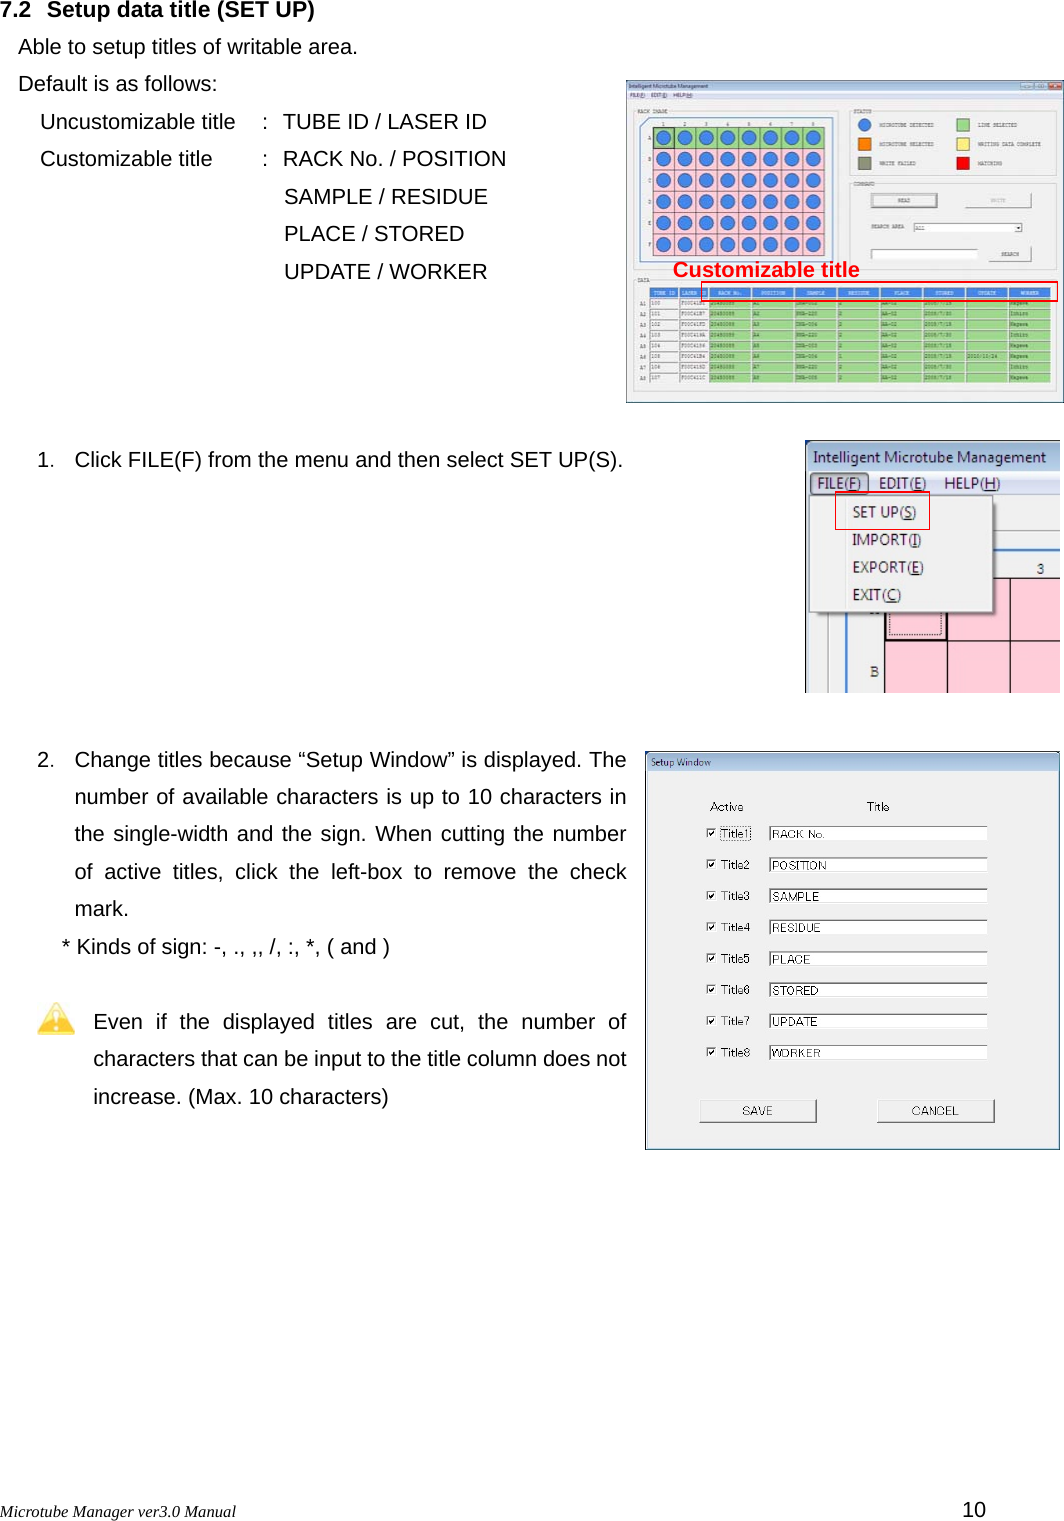 Microtube Manager ver3.0 Manual         10 7.2  Setup data title (SET UP) Able to setup titles of writable area. Default is as follows: Uncustomizable title  : TUBE ID / LASER ID Customizable title  : RACK No. / POSITION      SAMPLE / RESIDUE      PLACE / STORED      UPDATE / WORKER     1．  Click FILE(F) from the menu and then select SET UP(S).        2．  Change titles because “Setup Window” is displayed. The number of available characters is up to 10 characters in the single-width and the sign. When cutting the number of active titles, click the left-box to remove the check mark. * Kinds of sign: -, ., ,, /, :, *, ( and )  Even if the displayed titles are cut, the number of characters that can be input to the title column does not increase. (Max. 10 characters)   Customizable title 